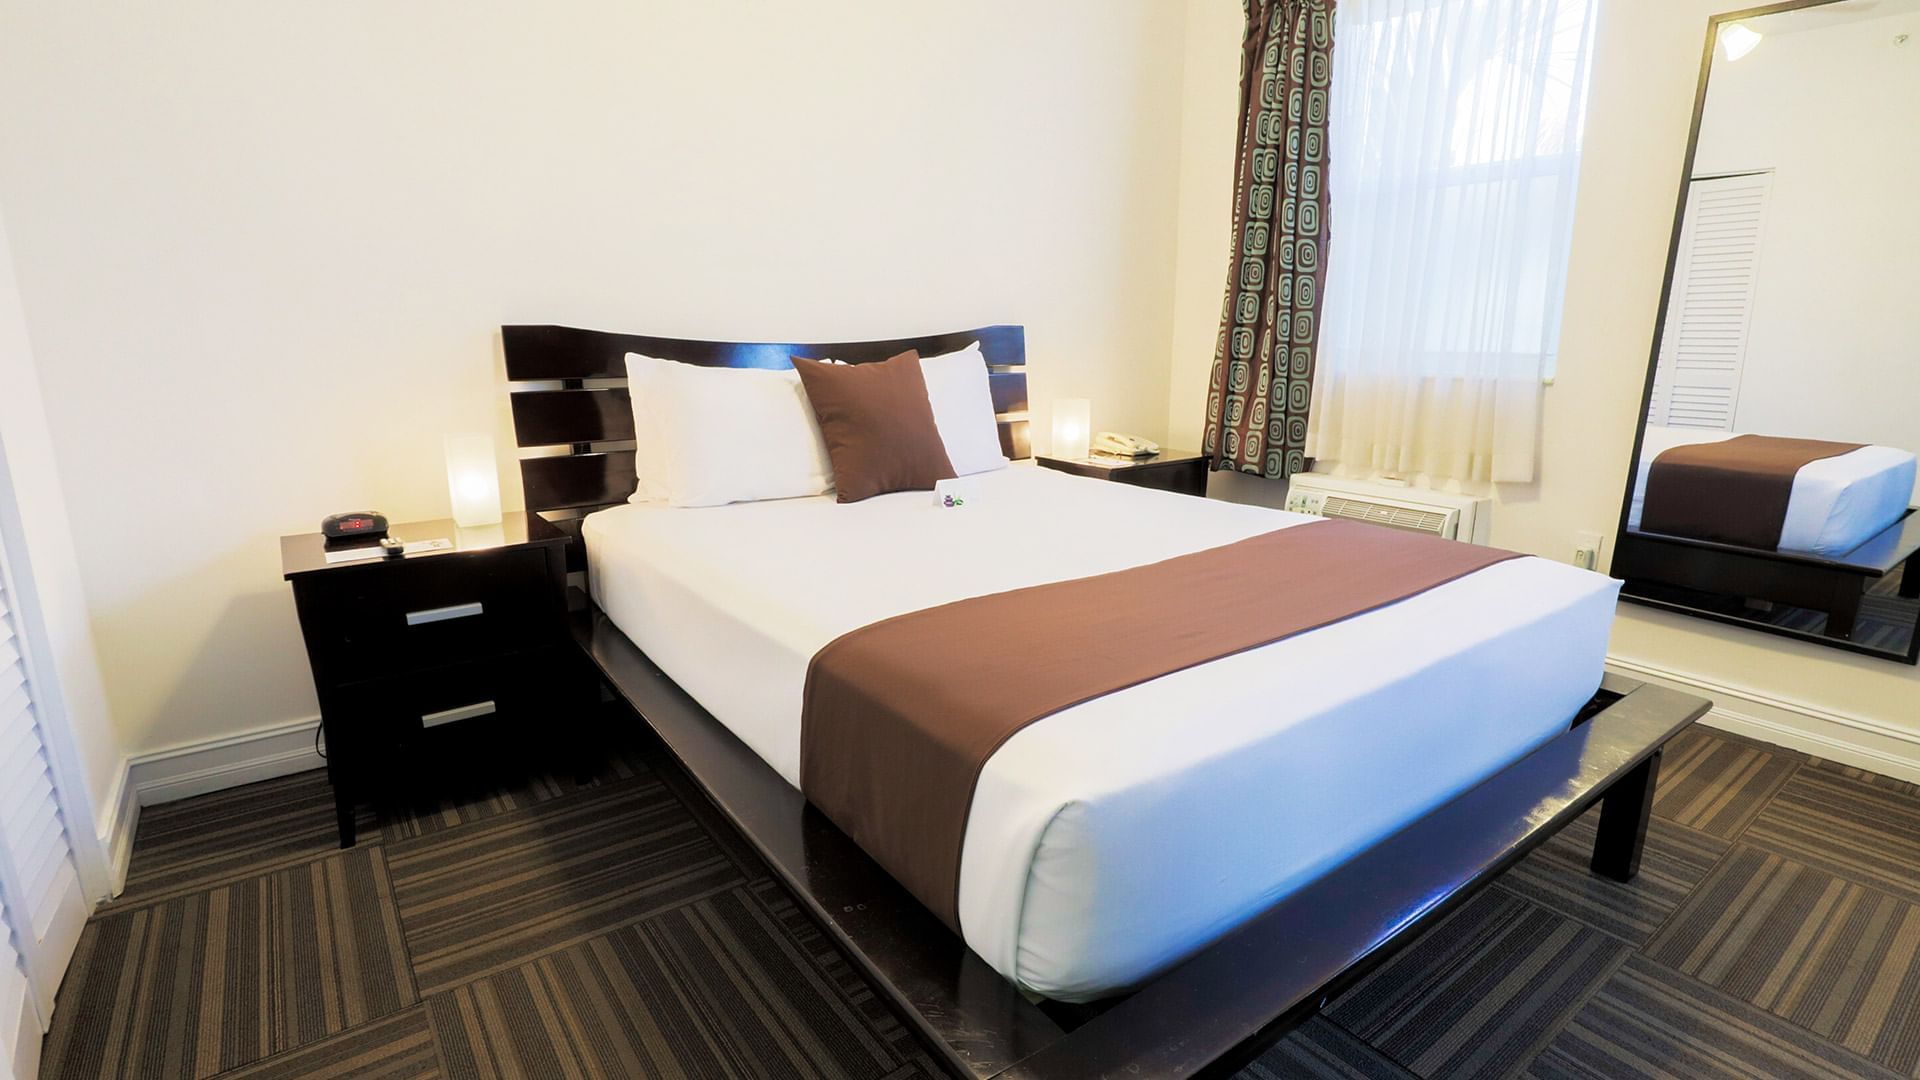 Interior of the Queen Studio room with a King bed at DOT Hotels